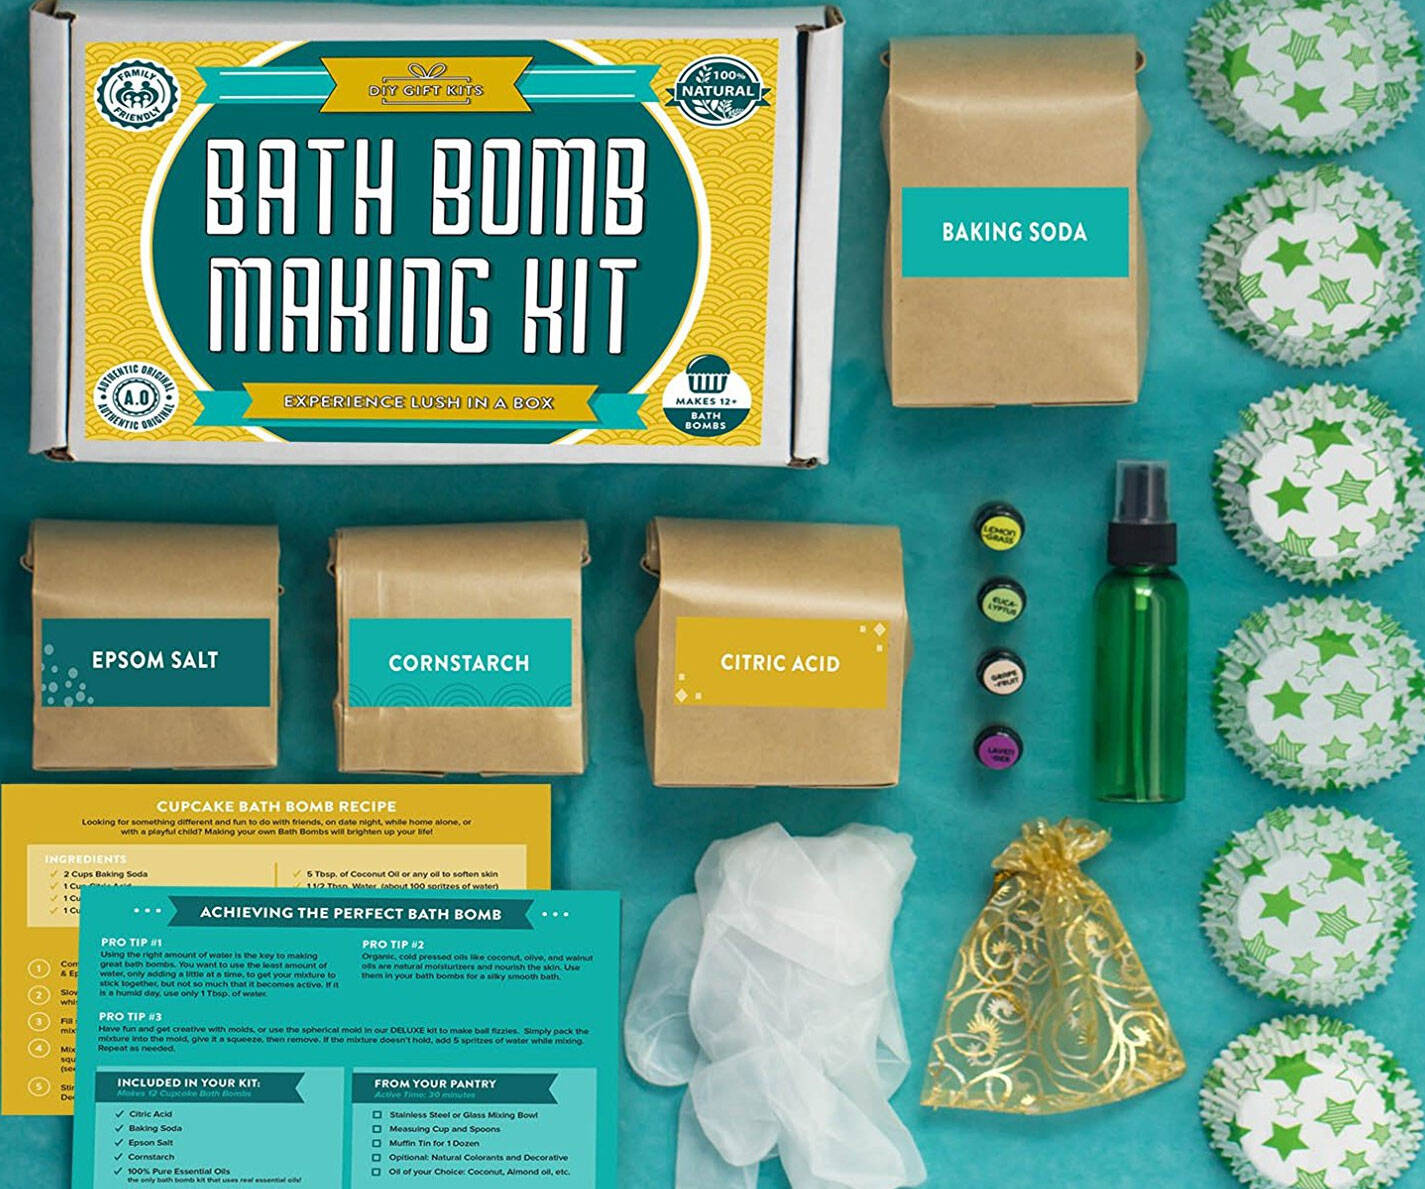 Bath Bomb Making Kit - //coolthings.us